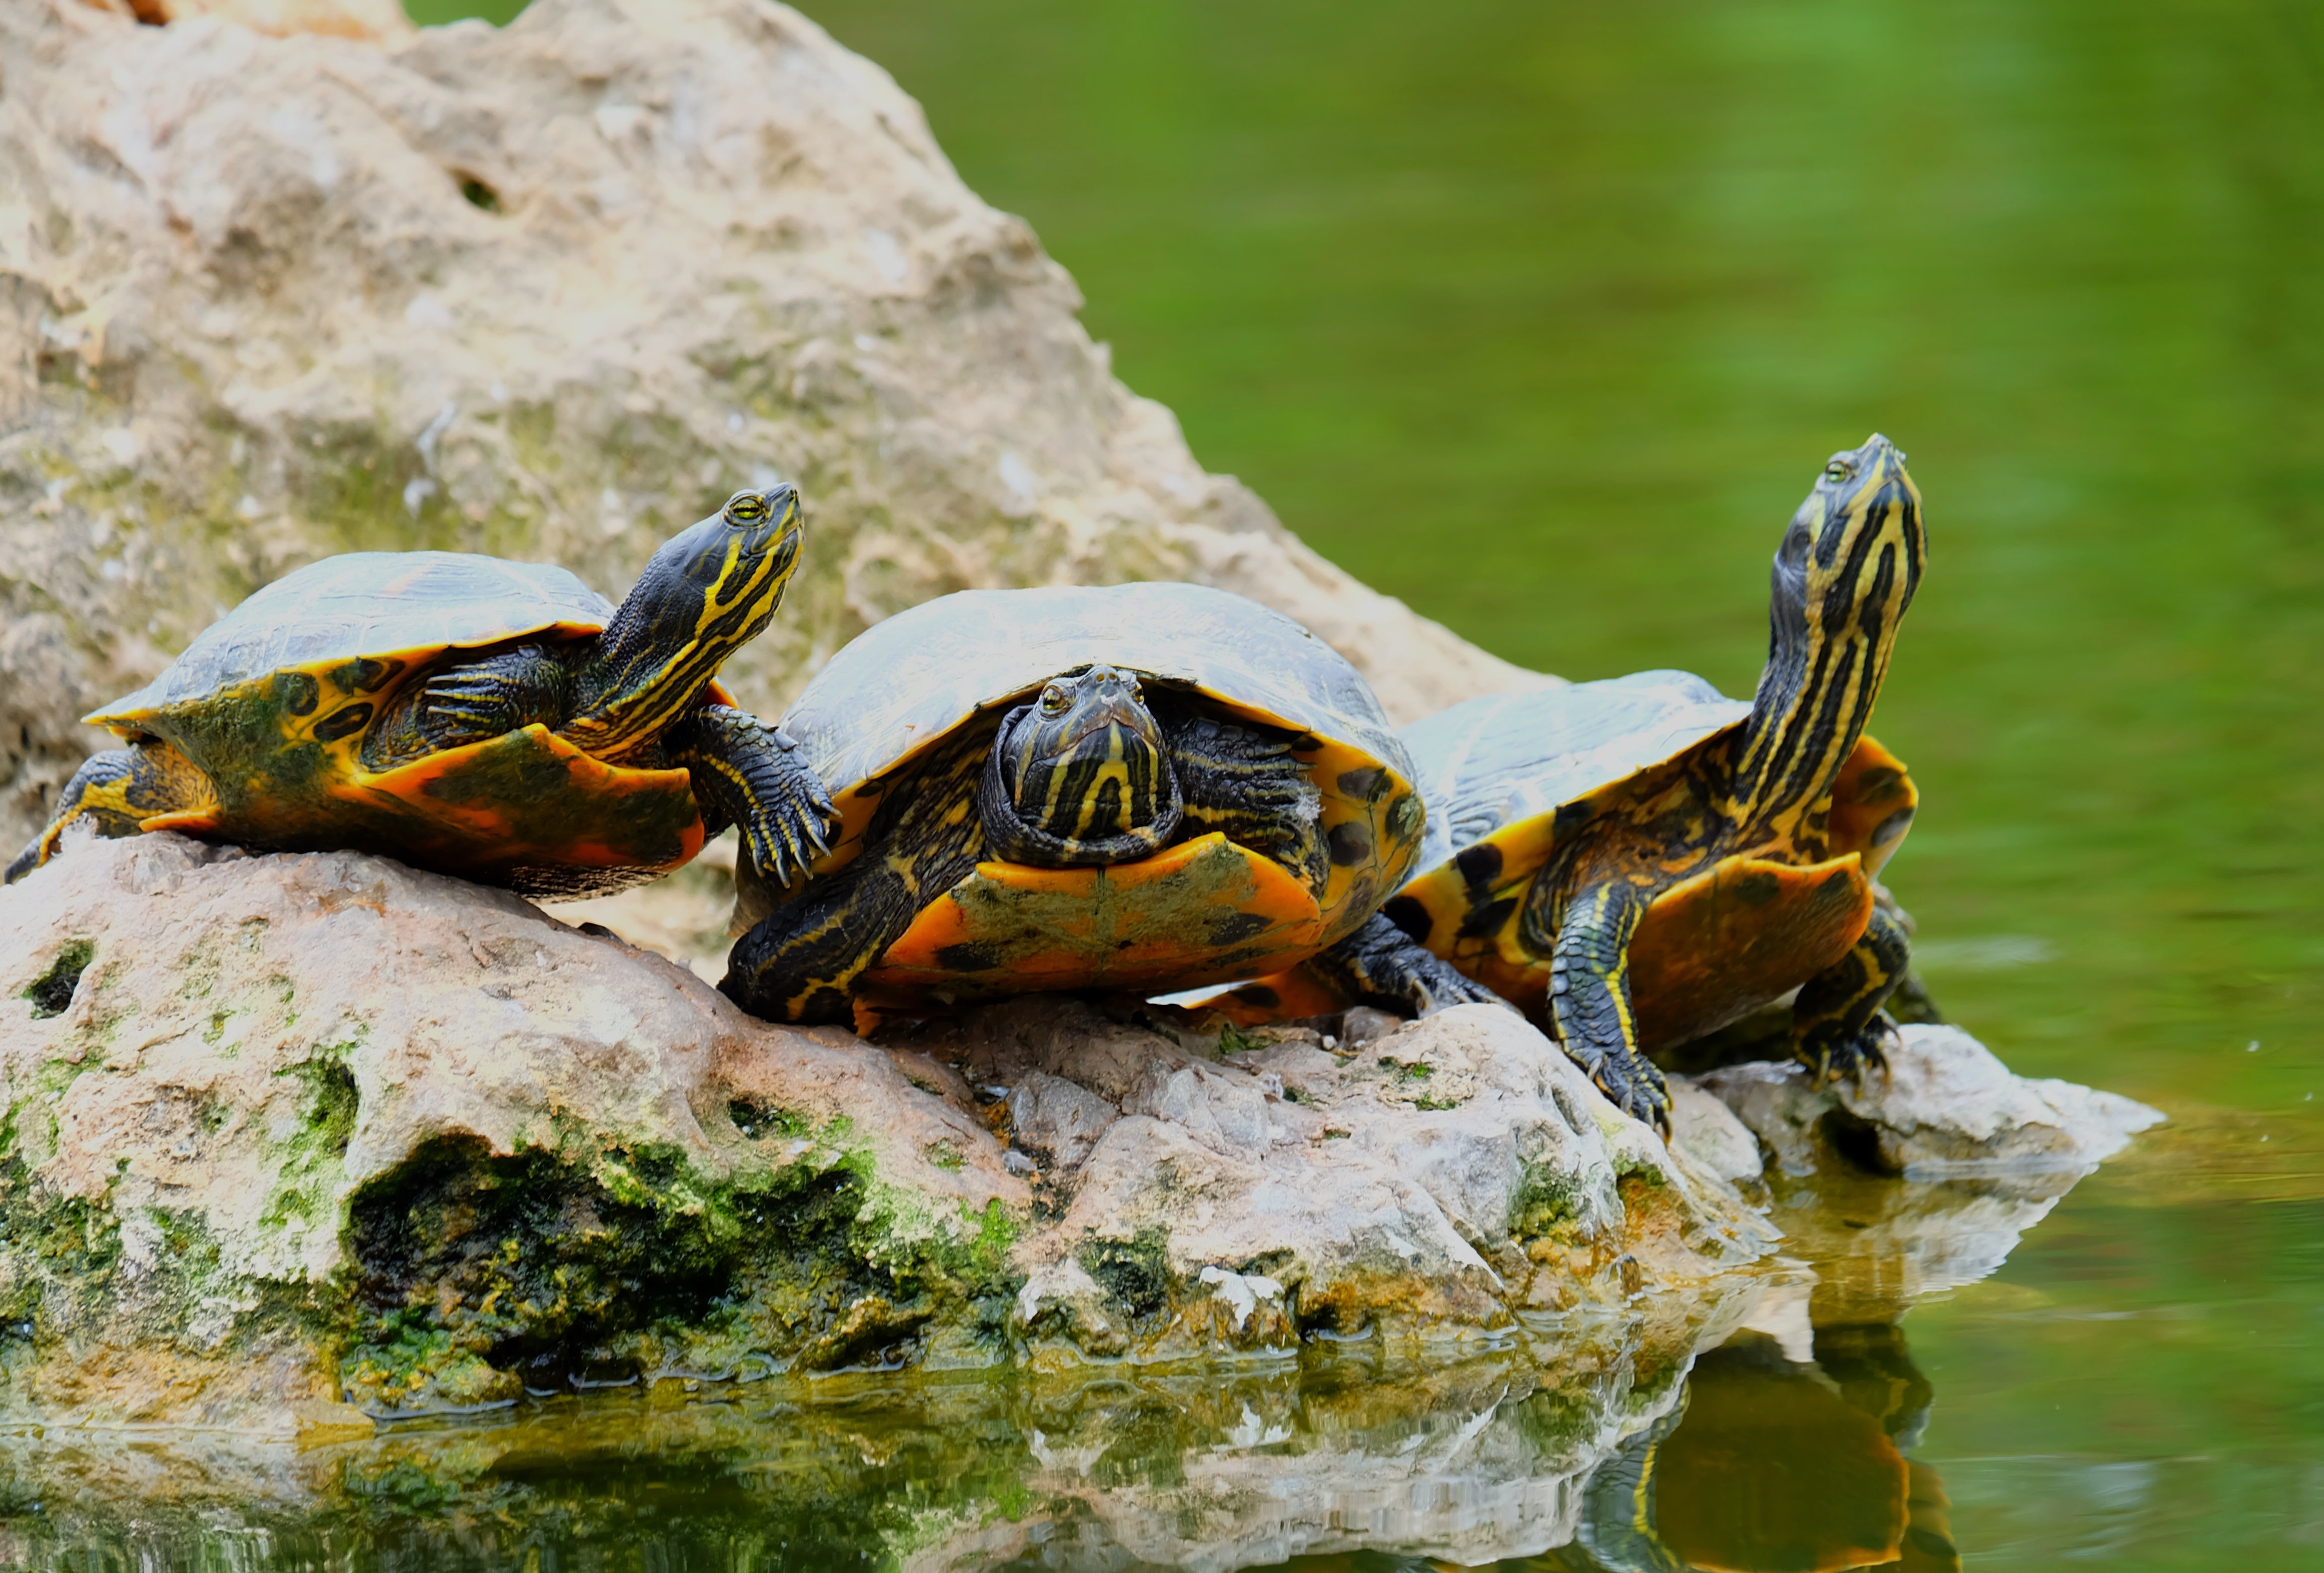 Red-eared turtles in the wild